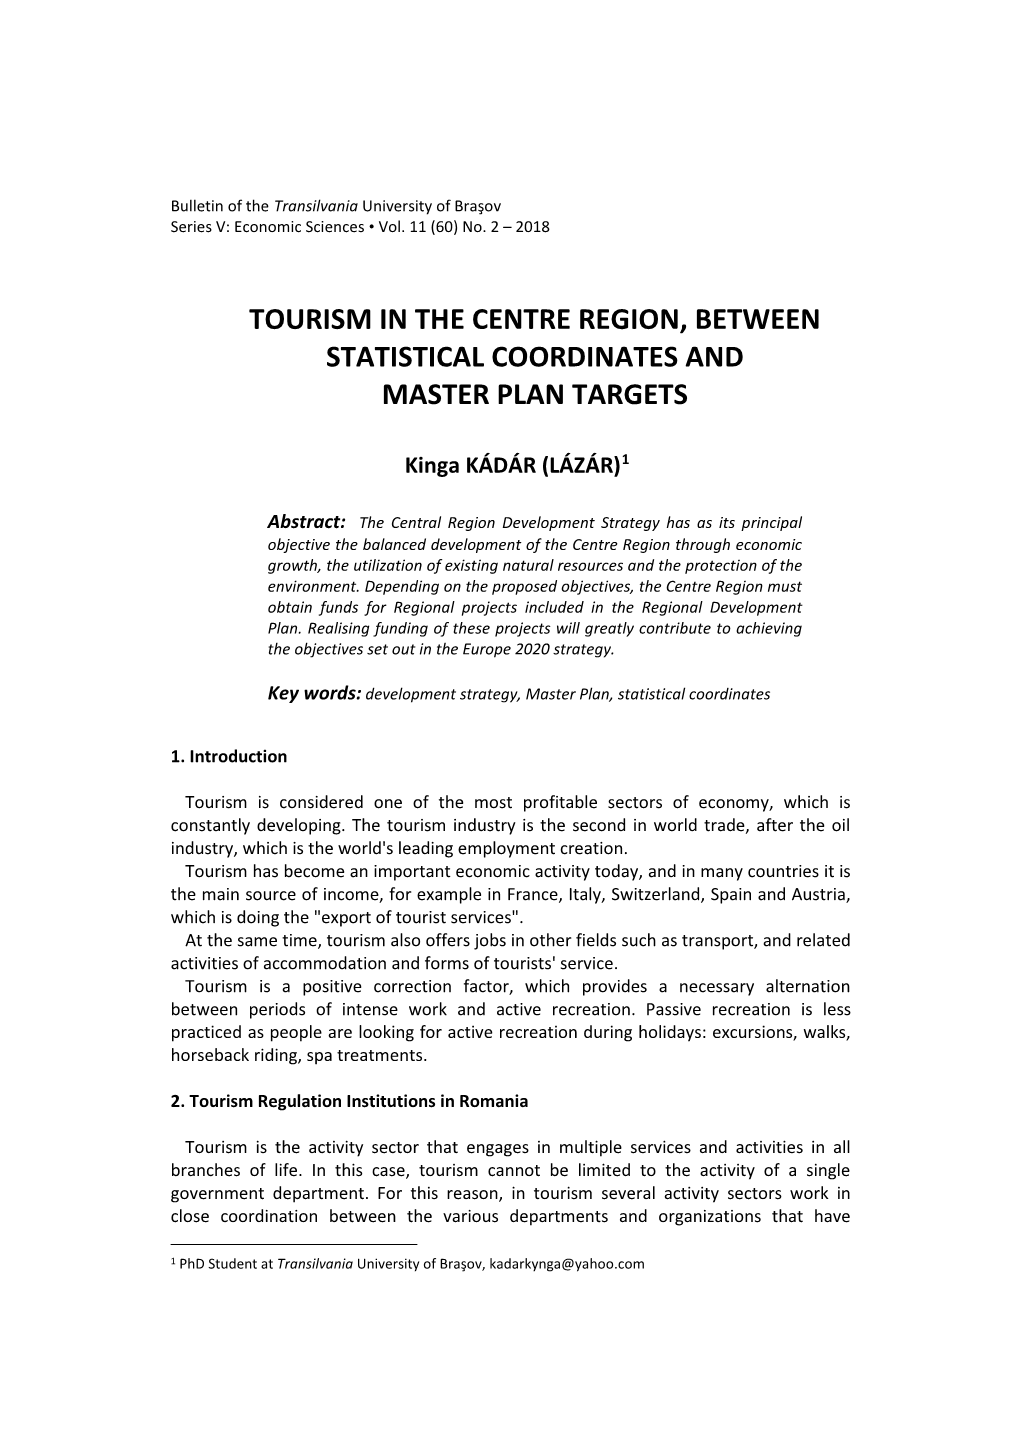 Tourism in the Centre Region, Between Statistical Coordinates and Master Plan Targets